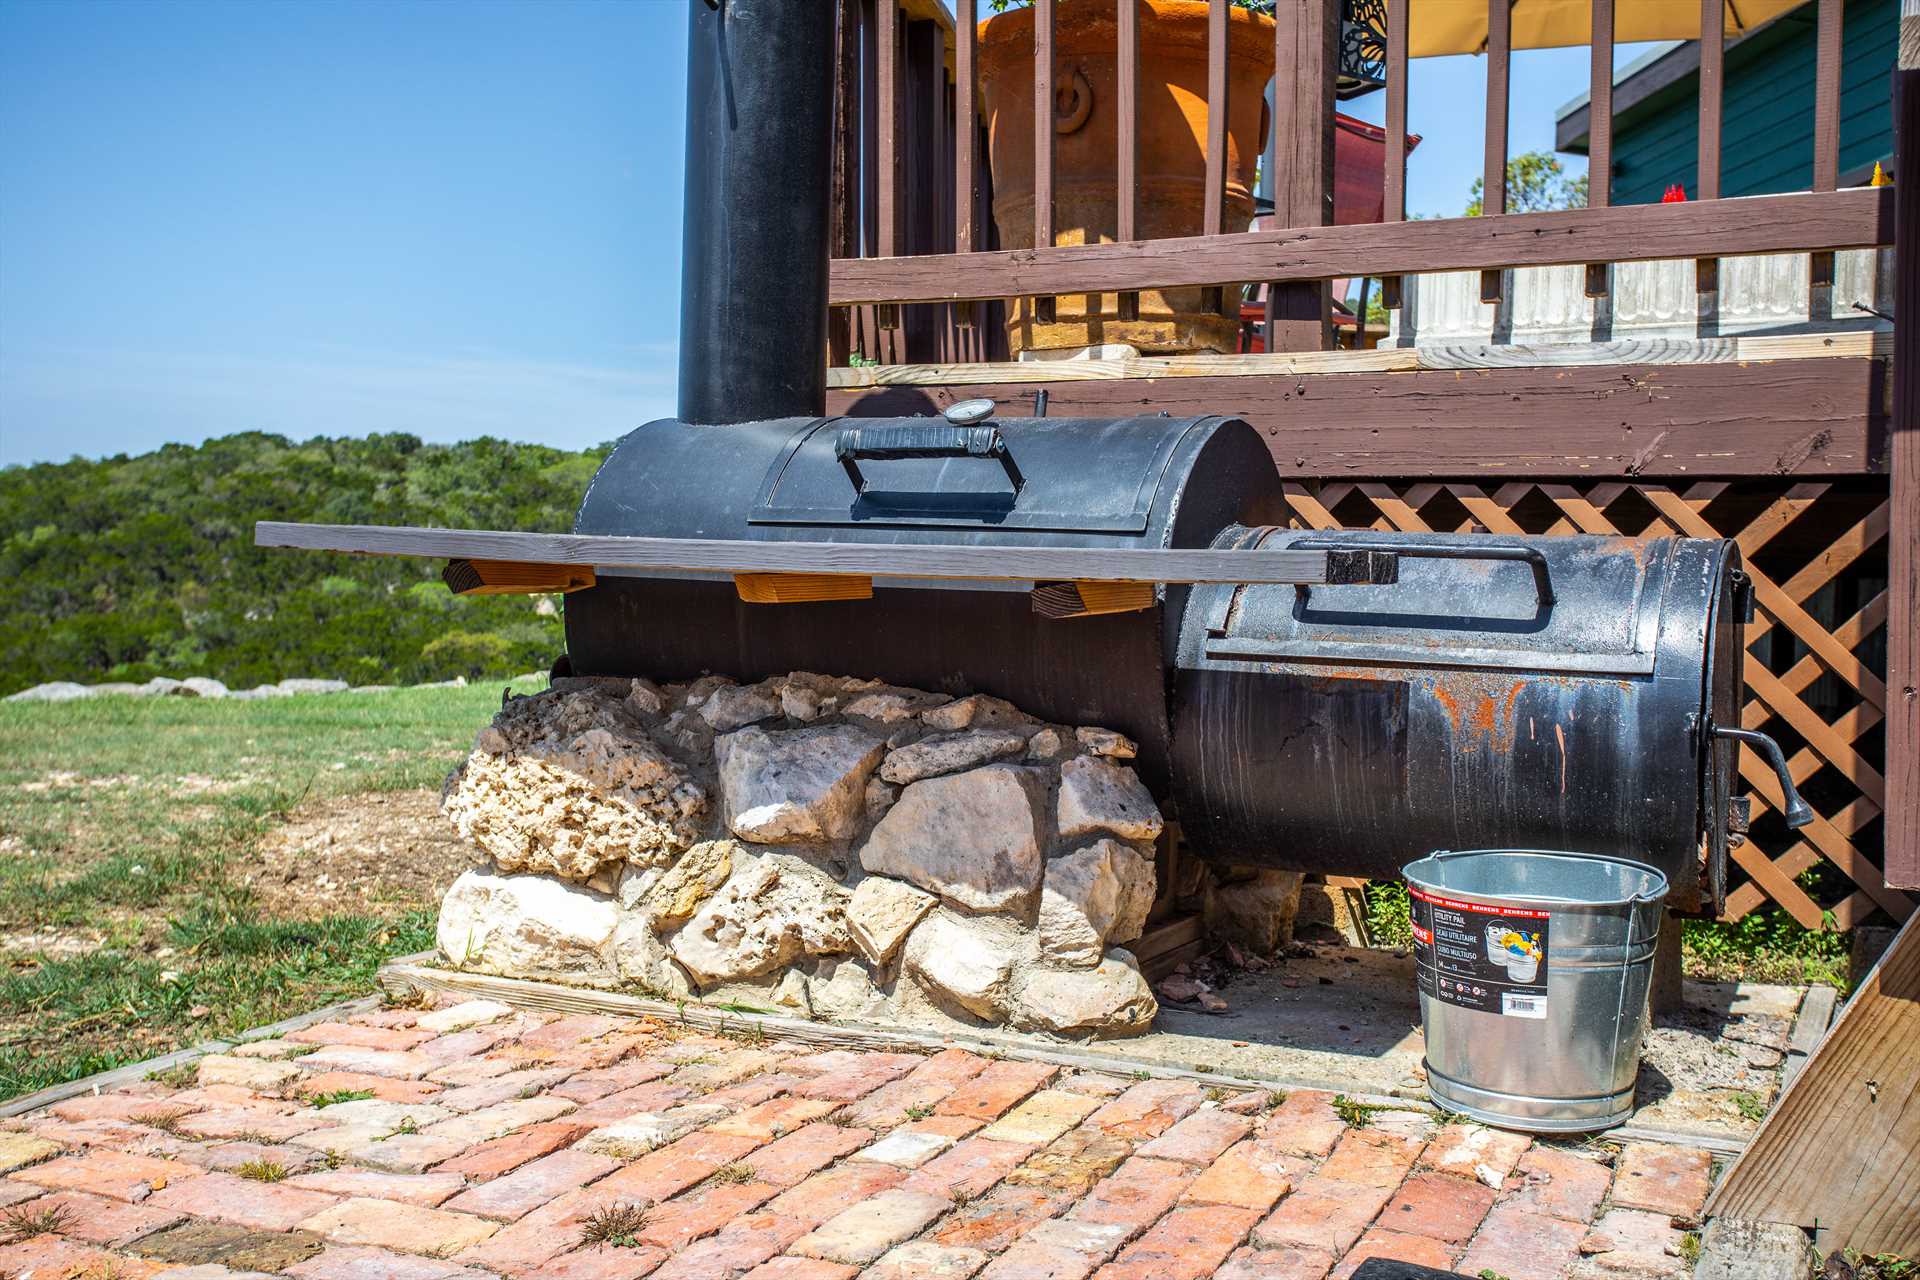                                                 It wouldn't be Texas without a hearty BBQ! Show off your grilling skills on the charcoal grill and smoker.